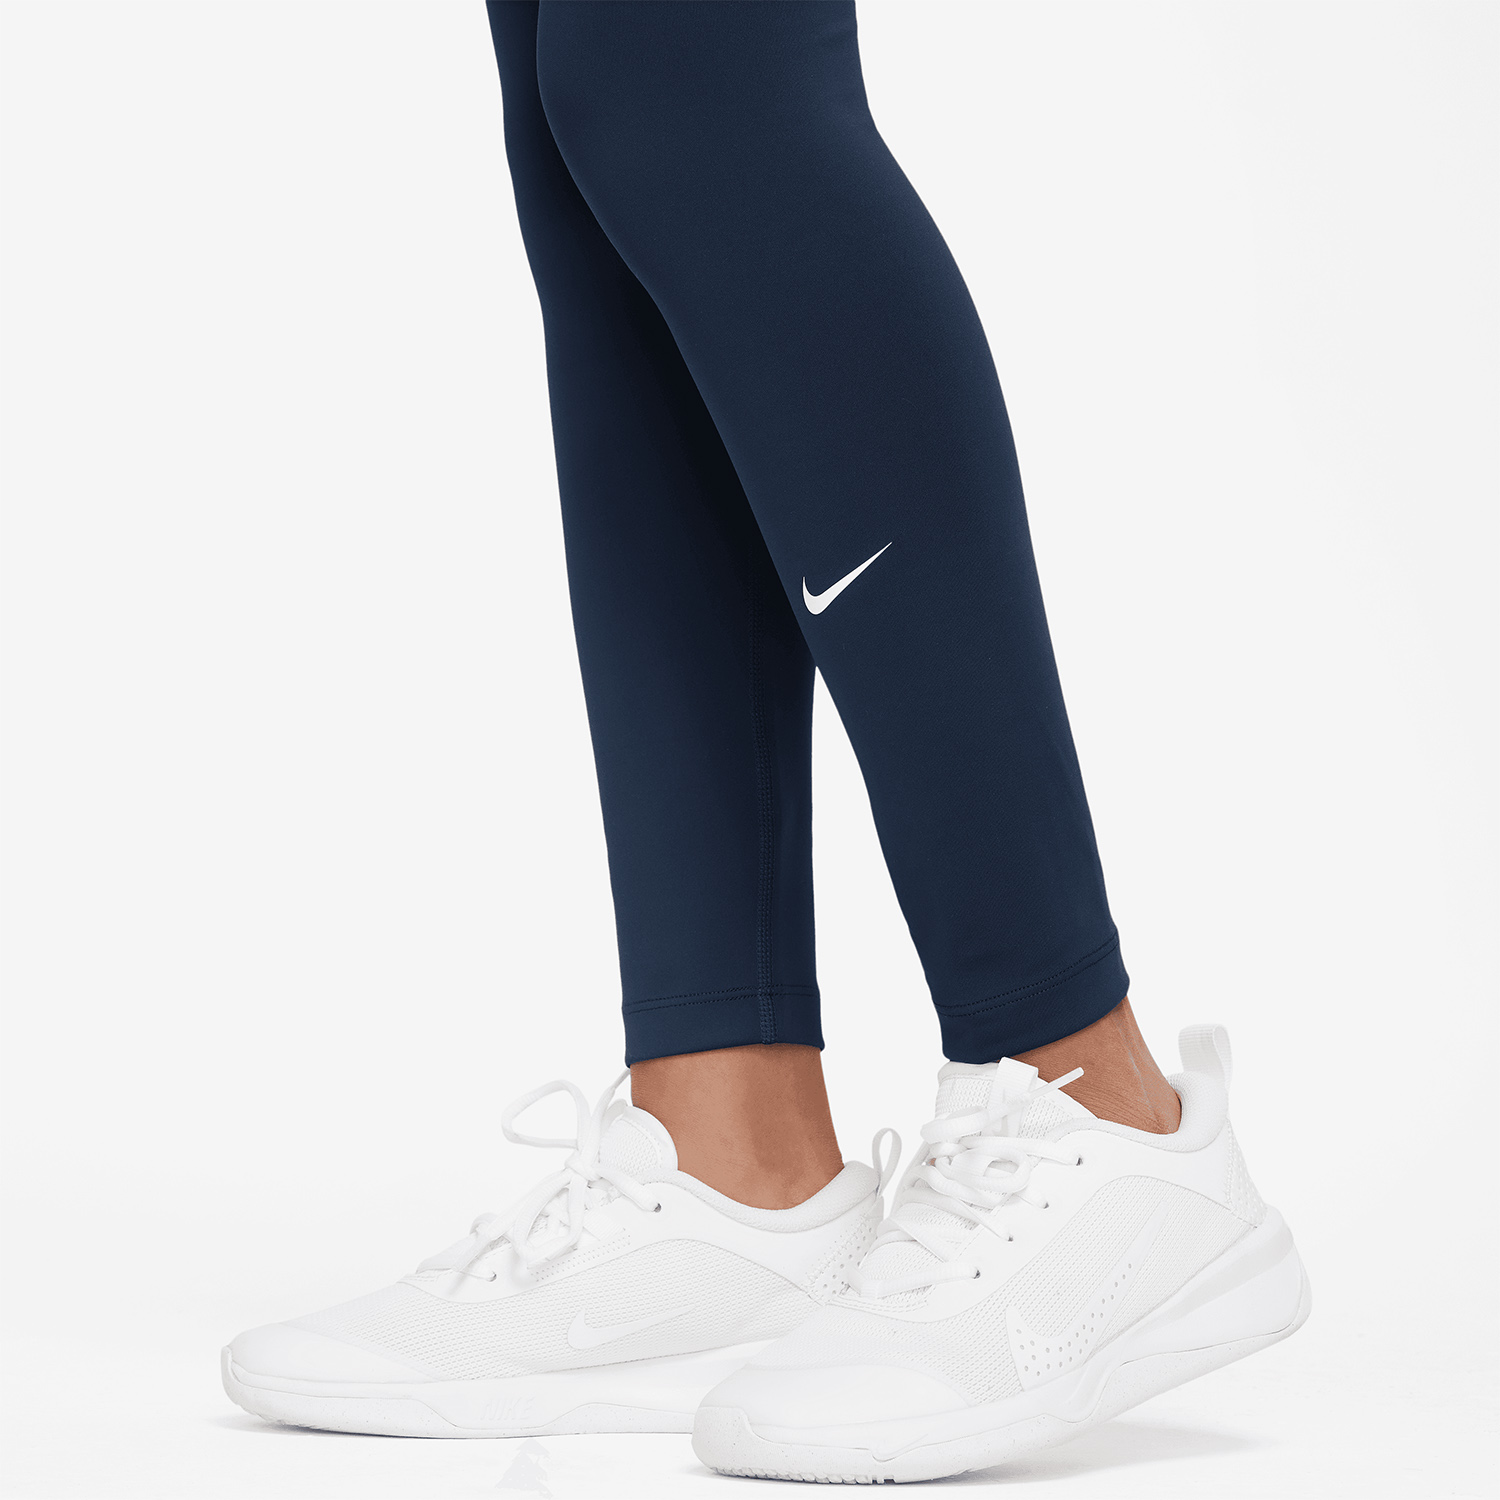 Nike Dri-FIT One Girl's Tennis Tights - Midnight Navy/White